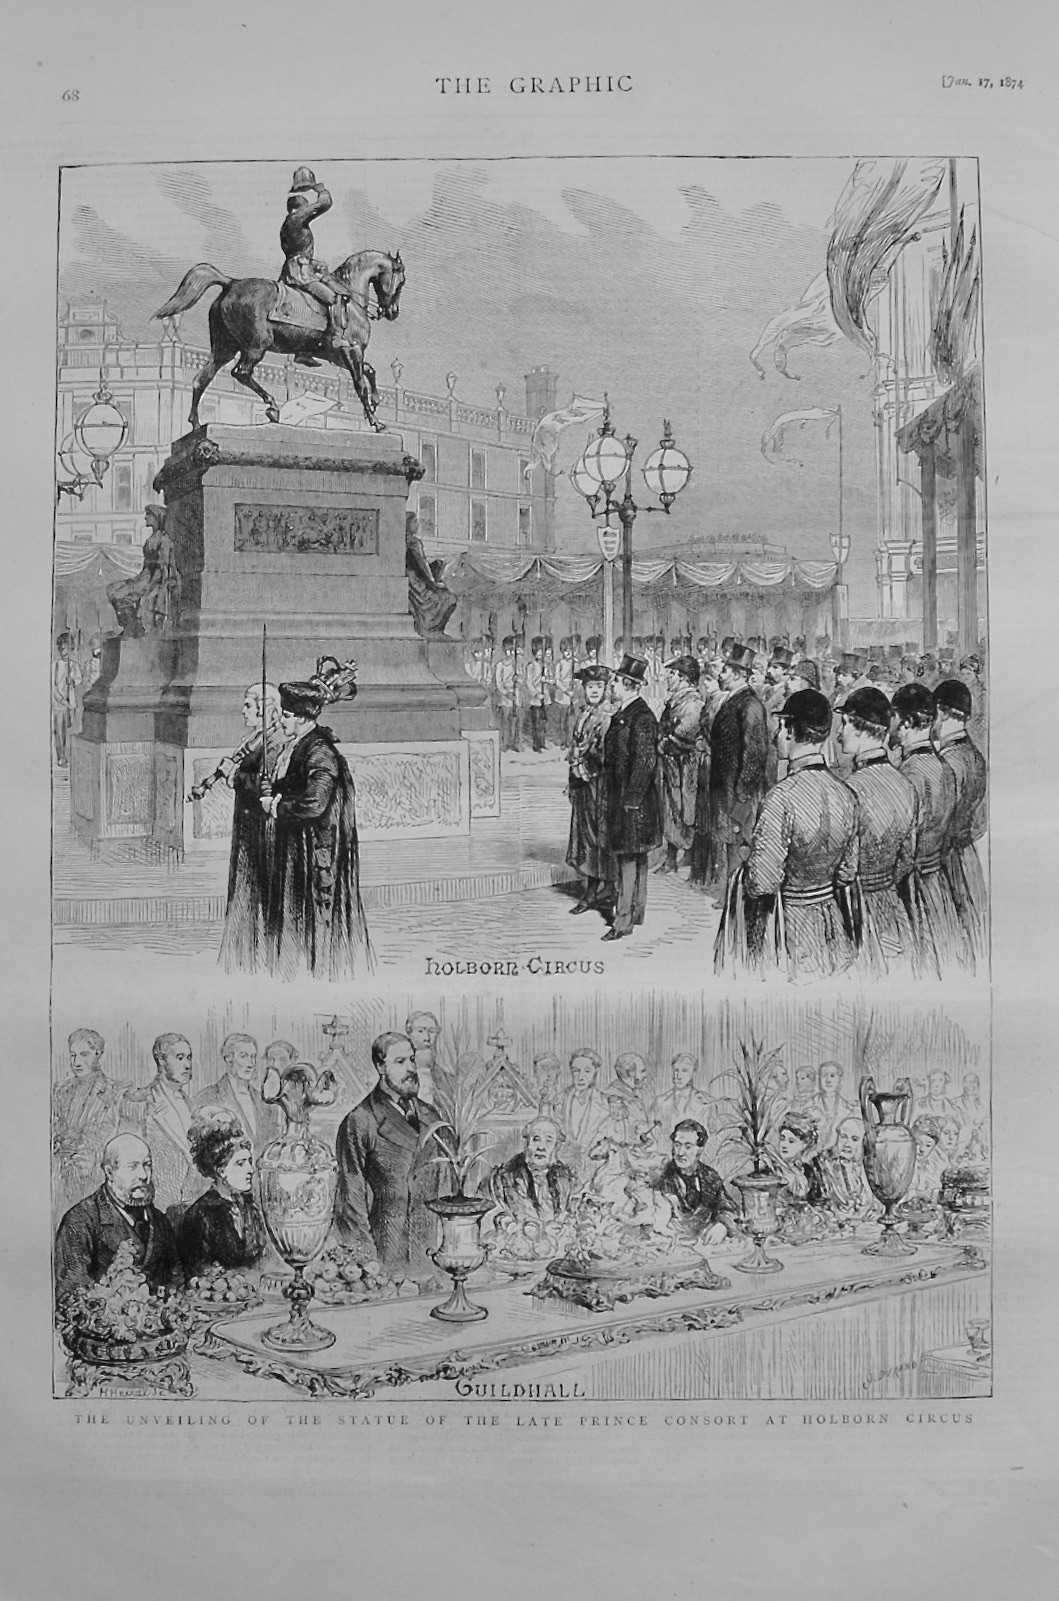 The Unveiling of the Statue of the Late Prince Consort at Holborn Circus - 